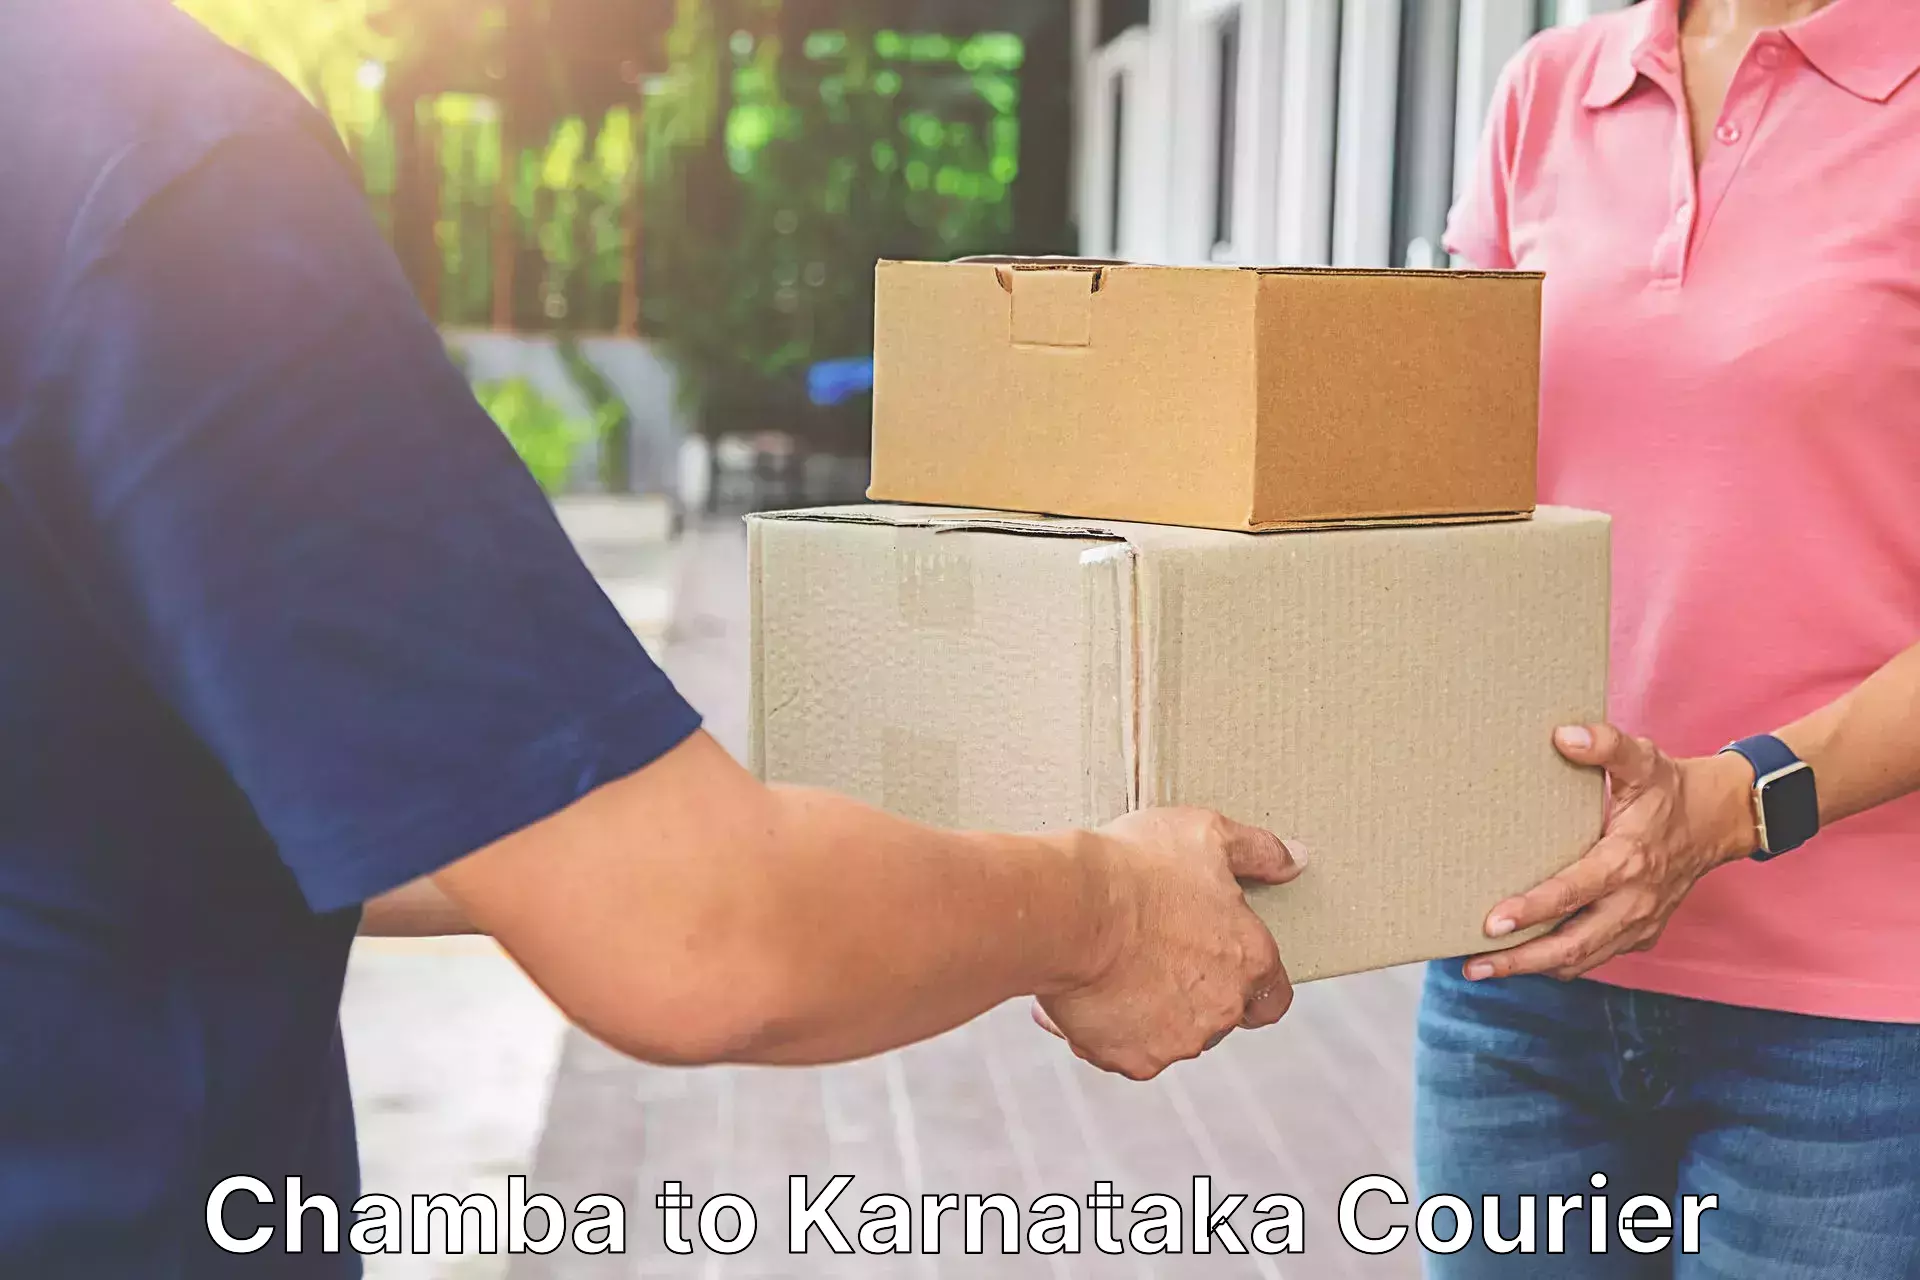 Customer-focused courier Chamba to Bagalkot